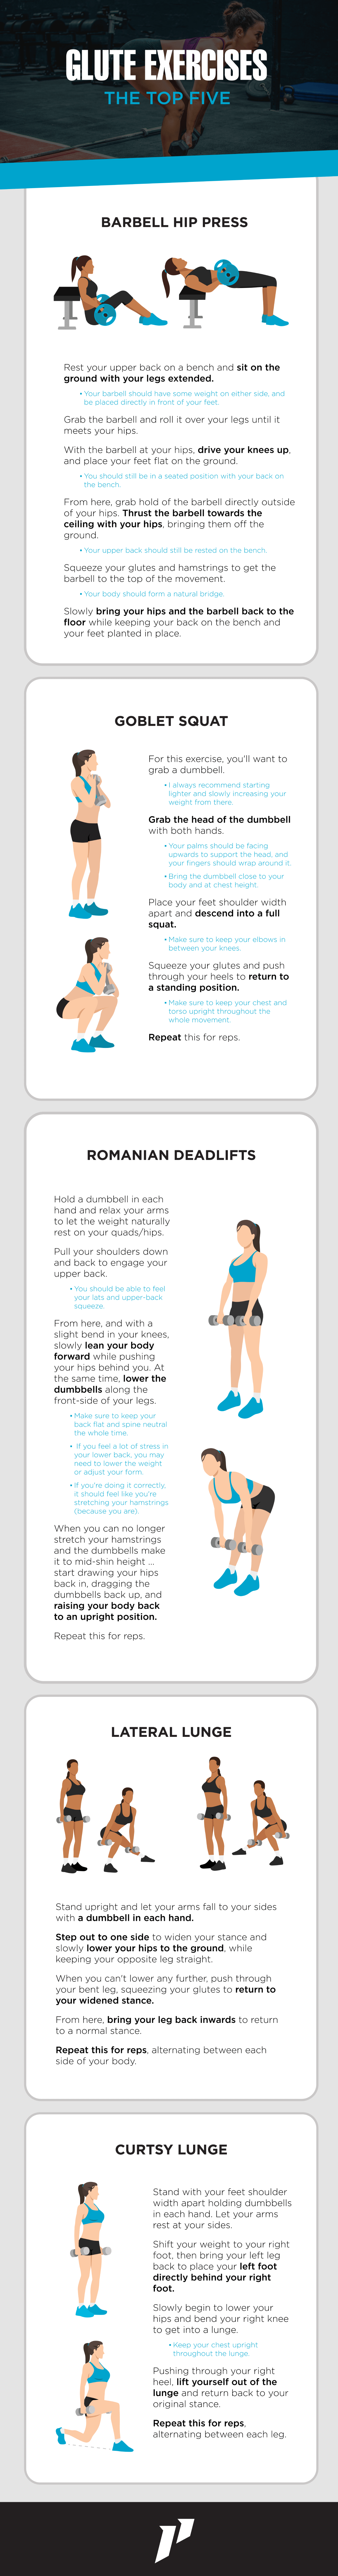 Top 5 Glute Exercises